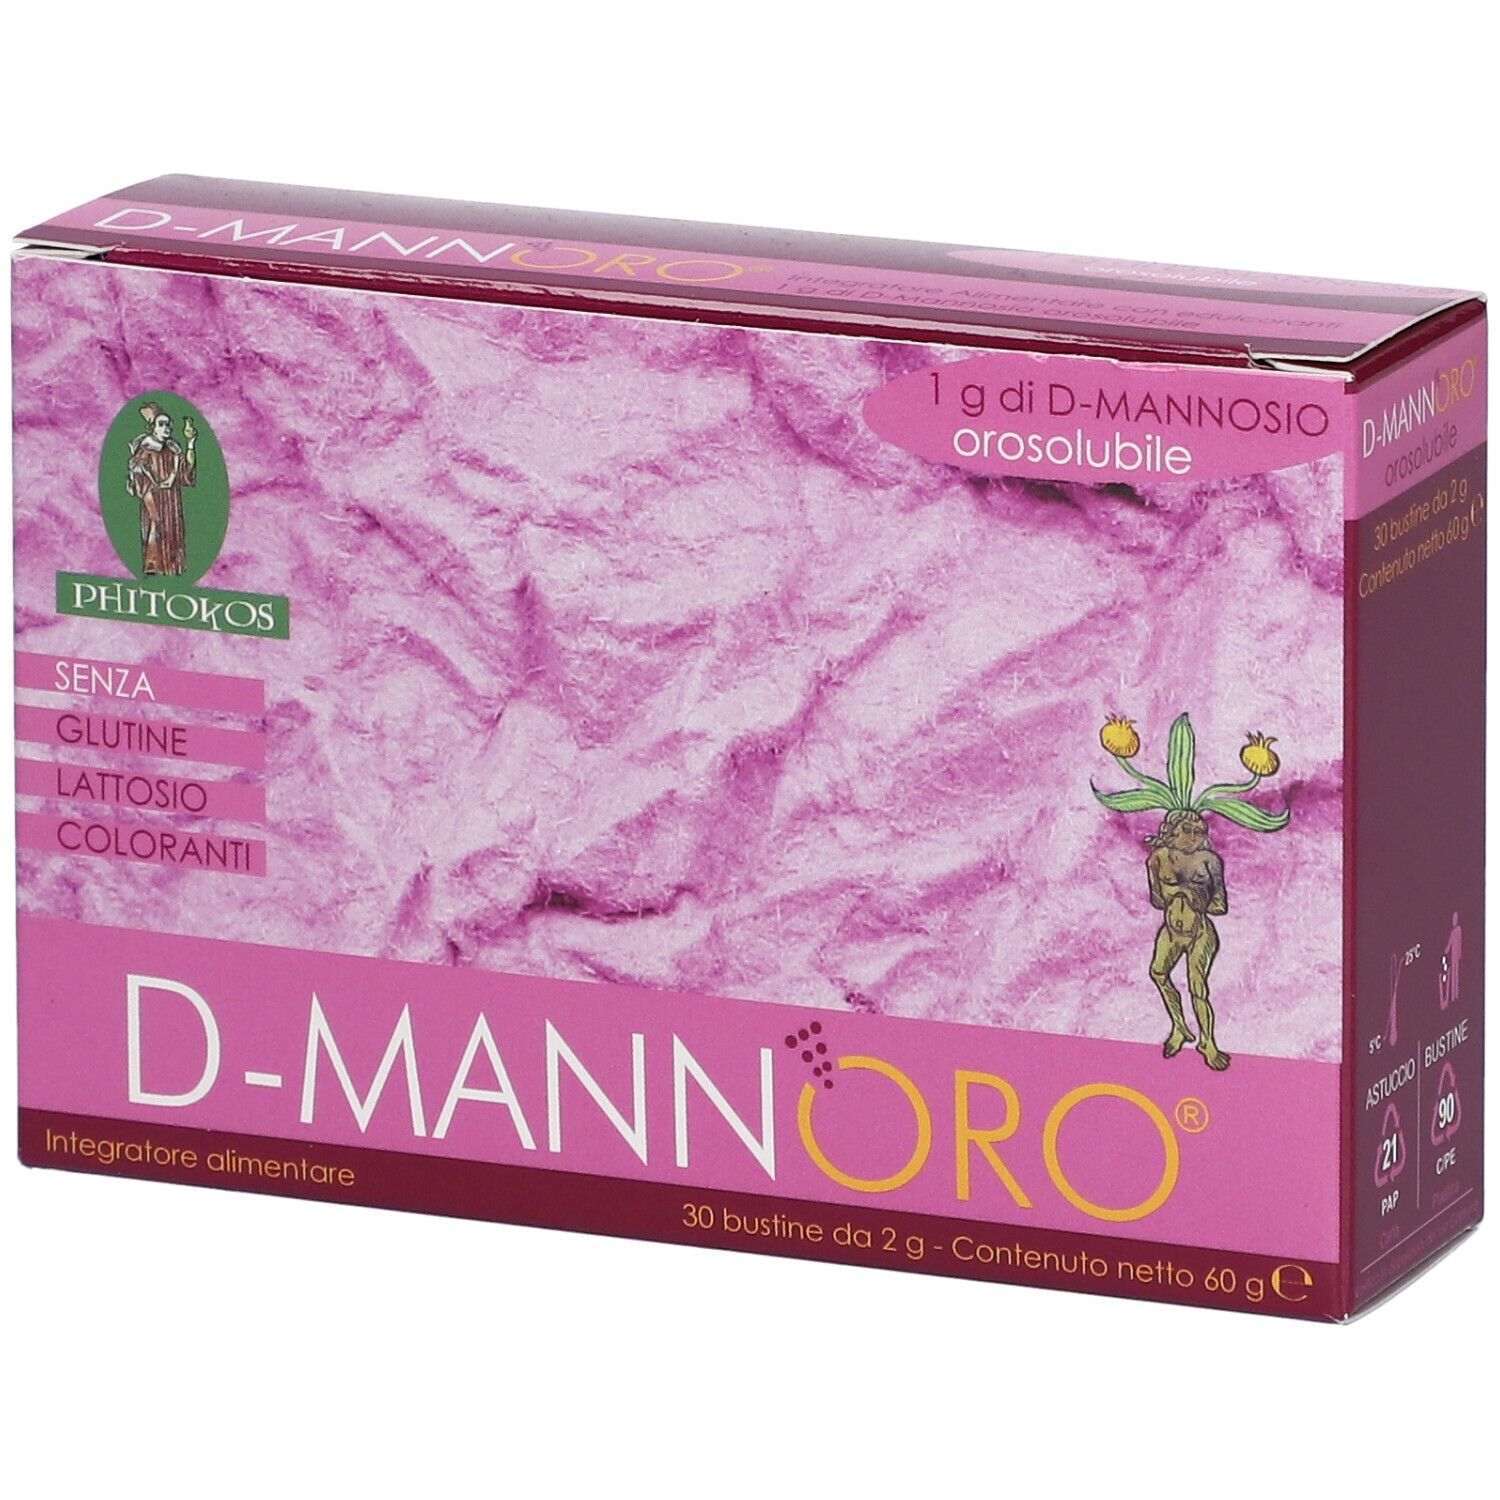 Image of D-MANNORO®